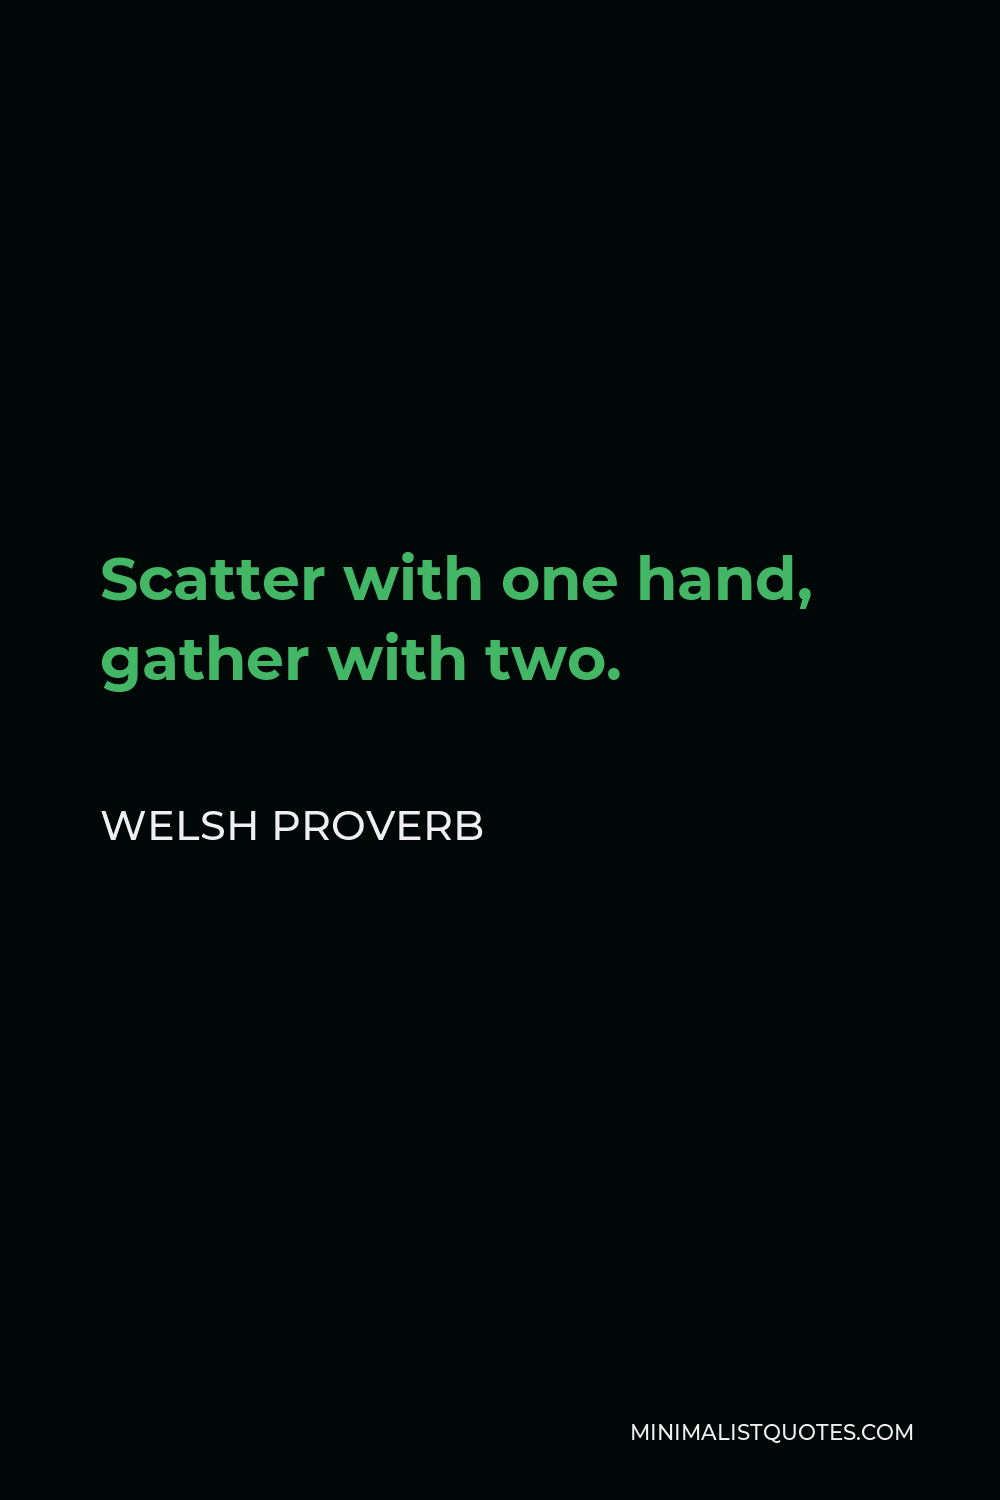 Welsh Proverb Quote - Scatter with one hand, gather with two.